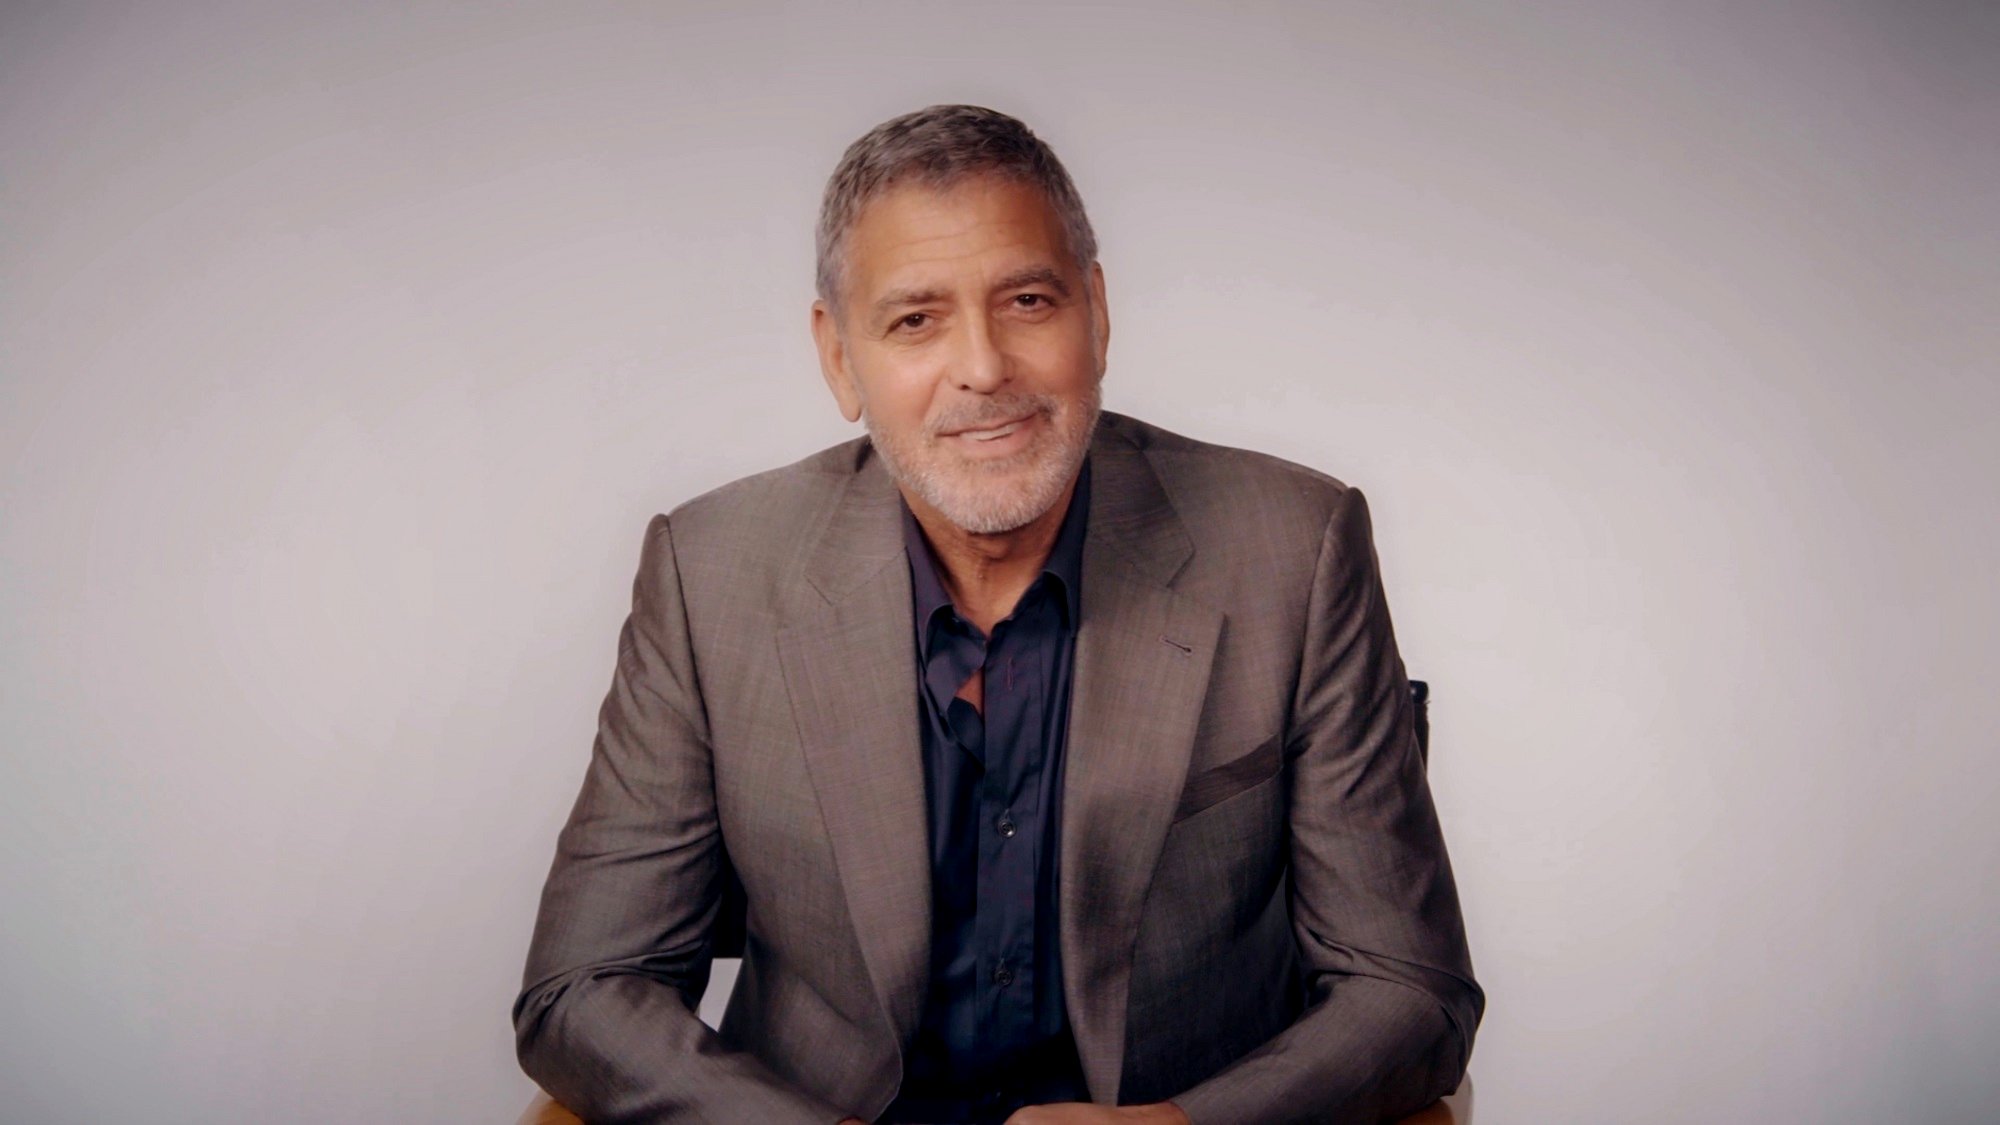 George Clooney recently starred in 'The Midnight Sky'